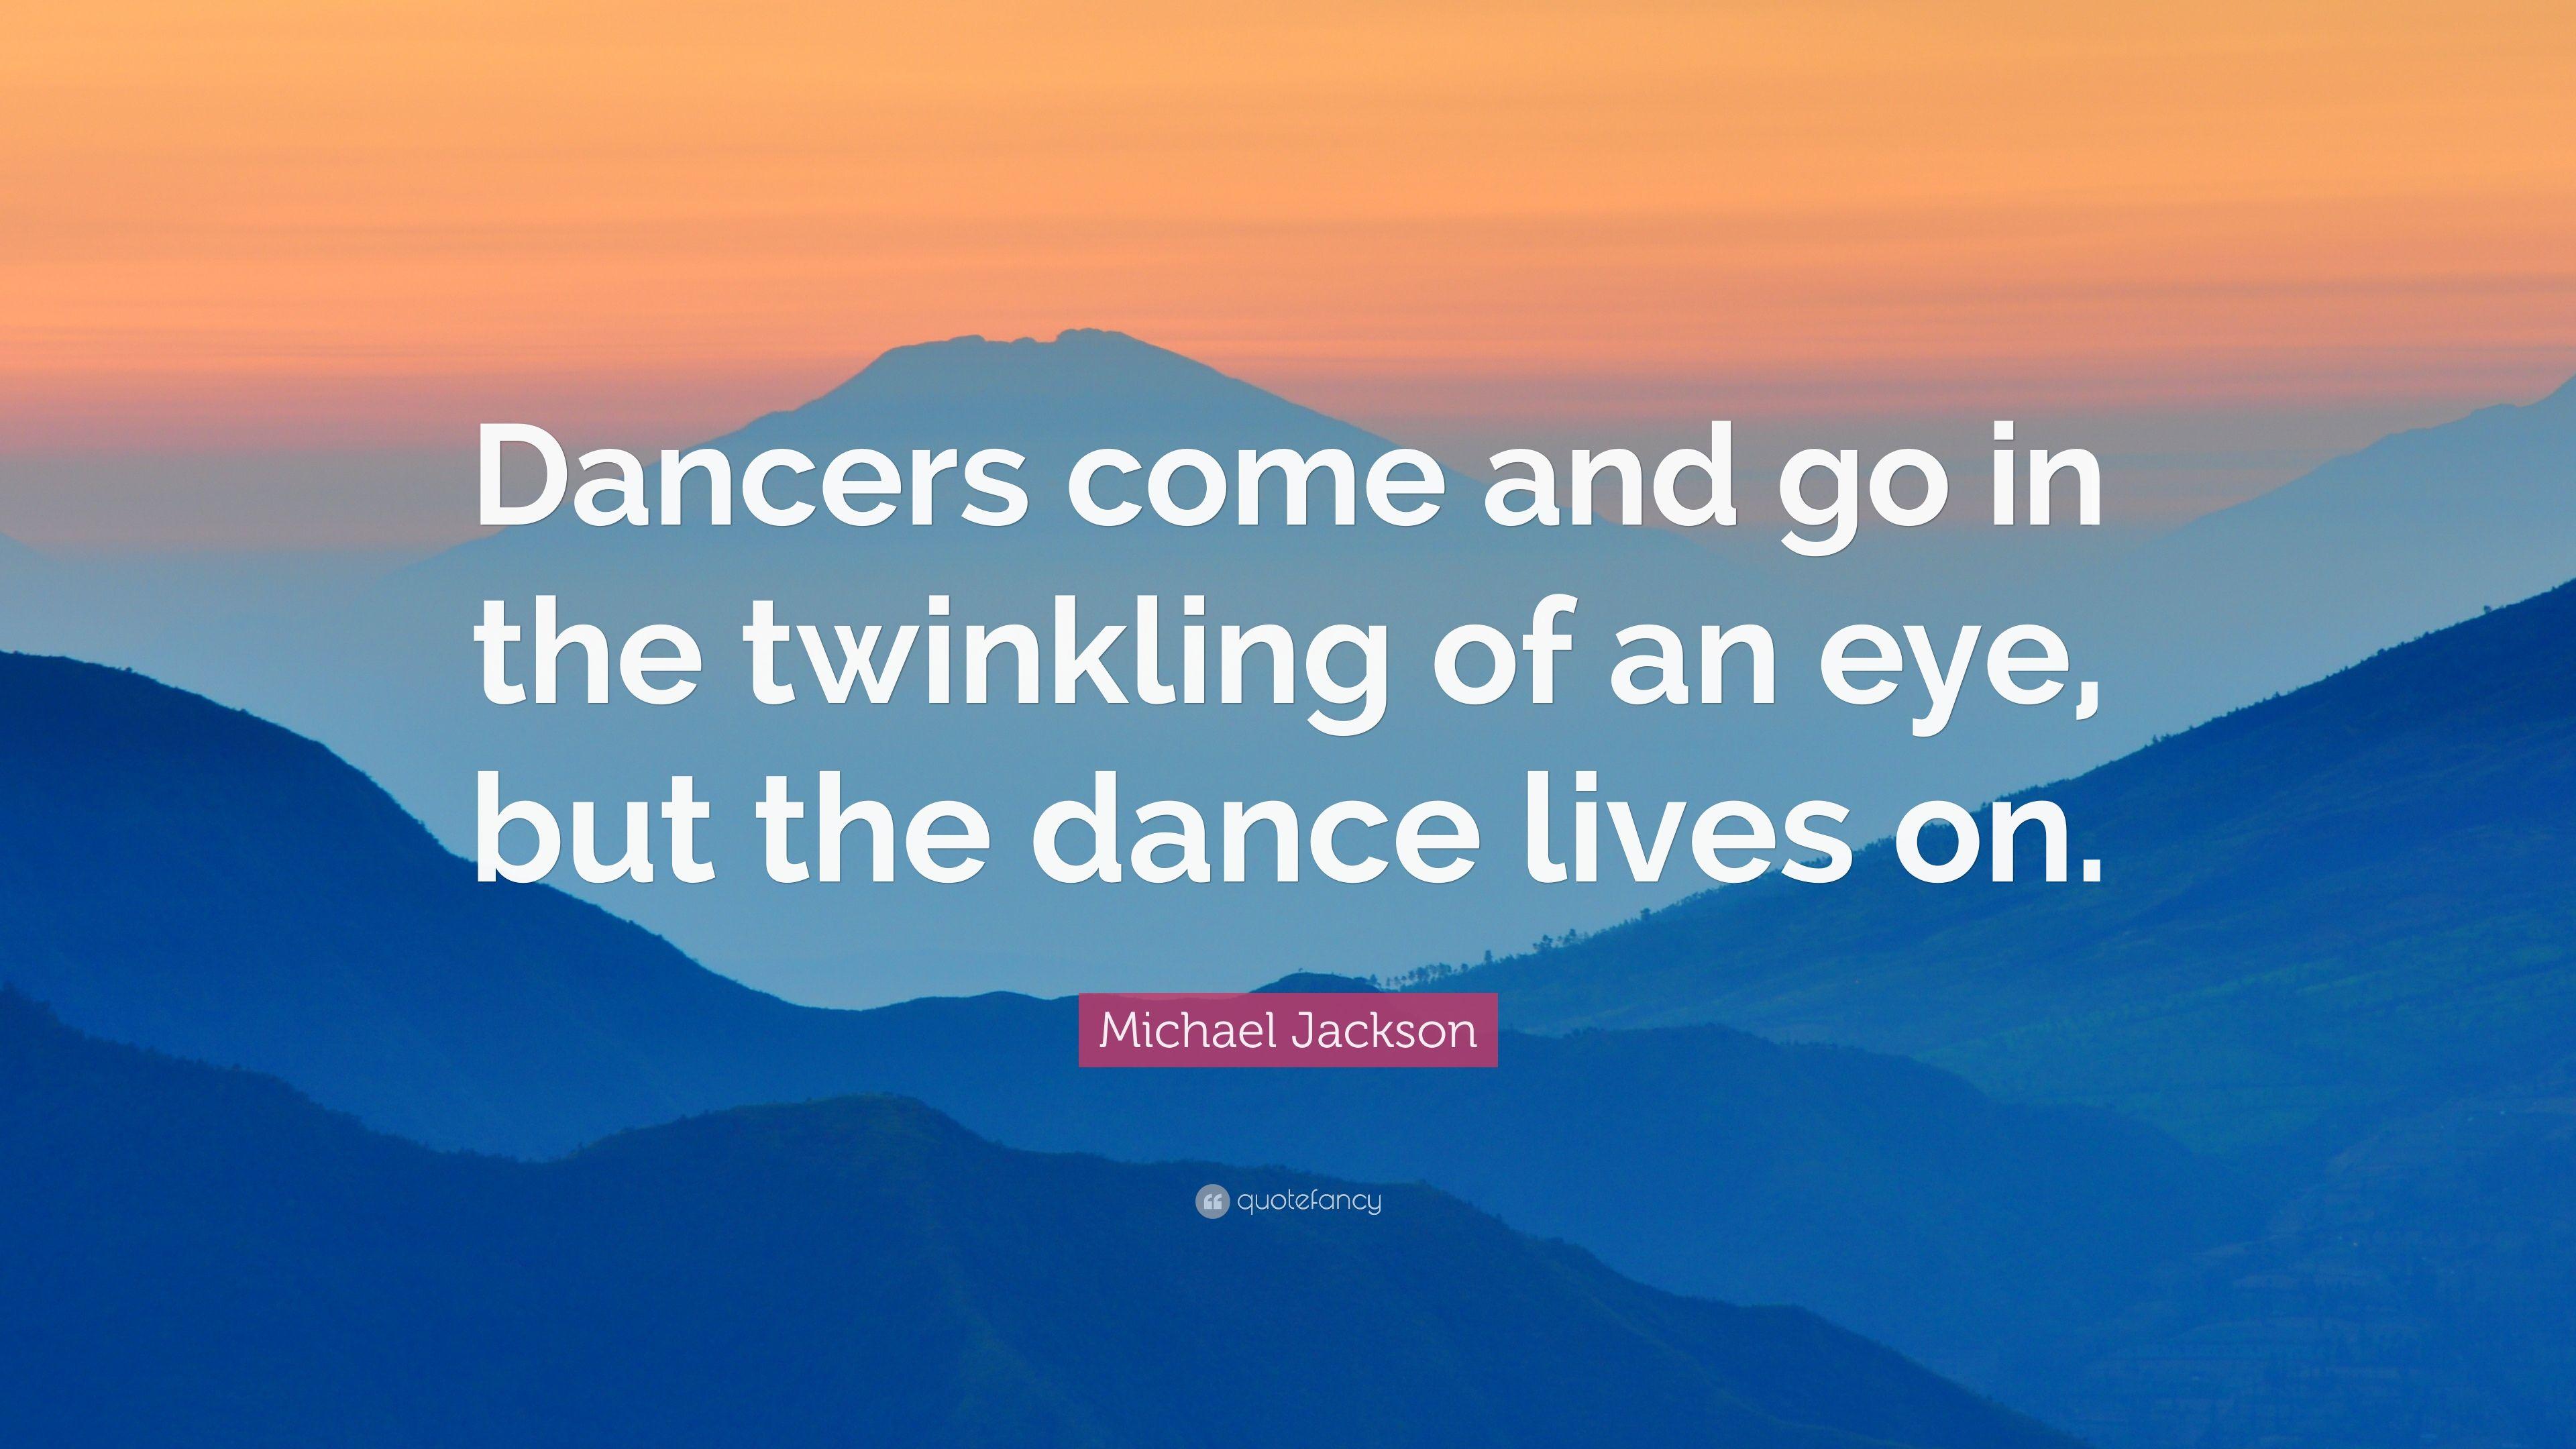 Michael Jackson Quote: “Dancers come and go in the twinkling of an